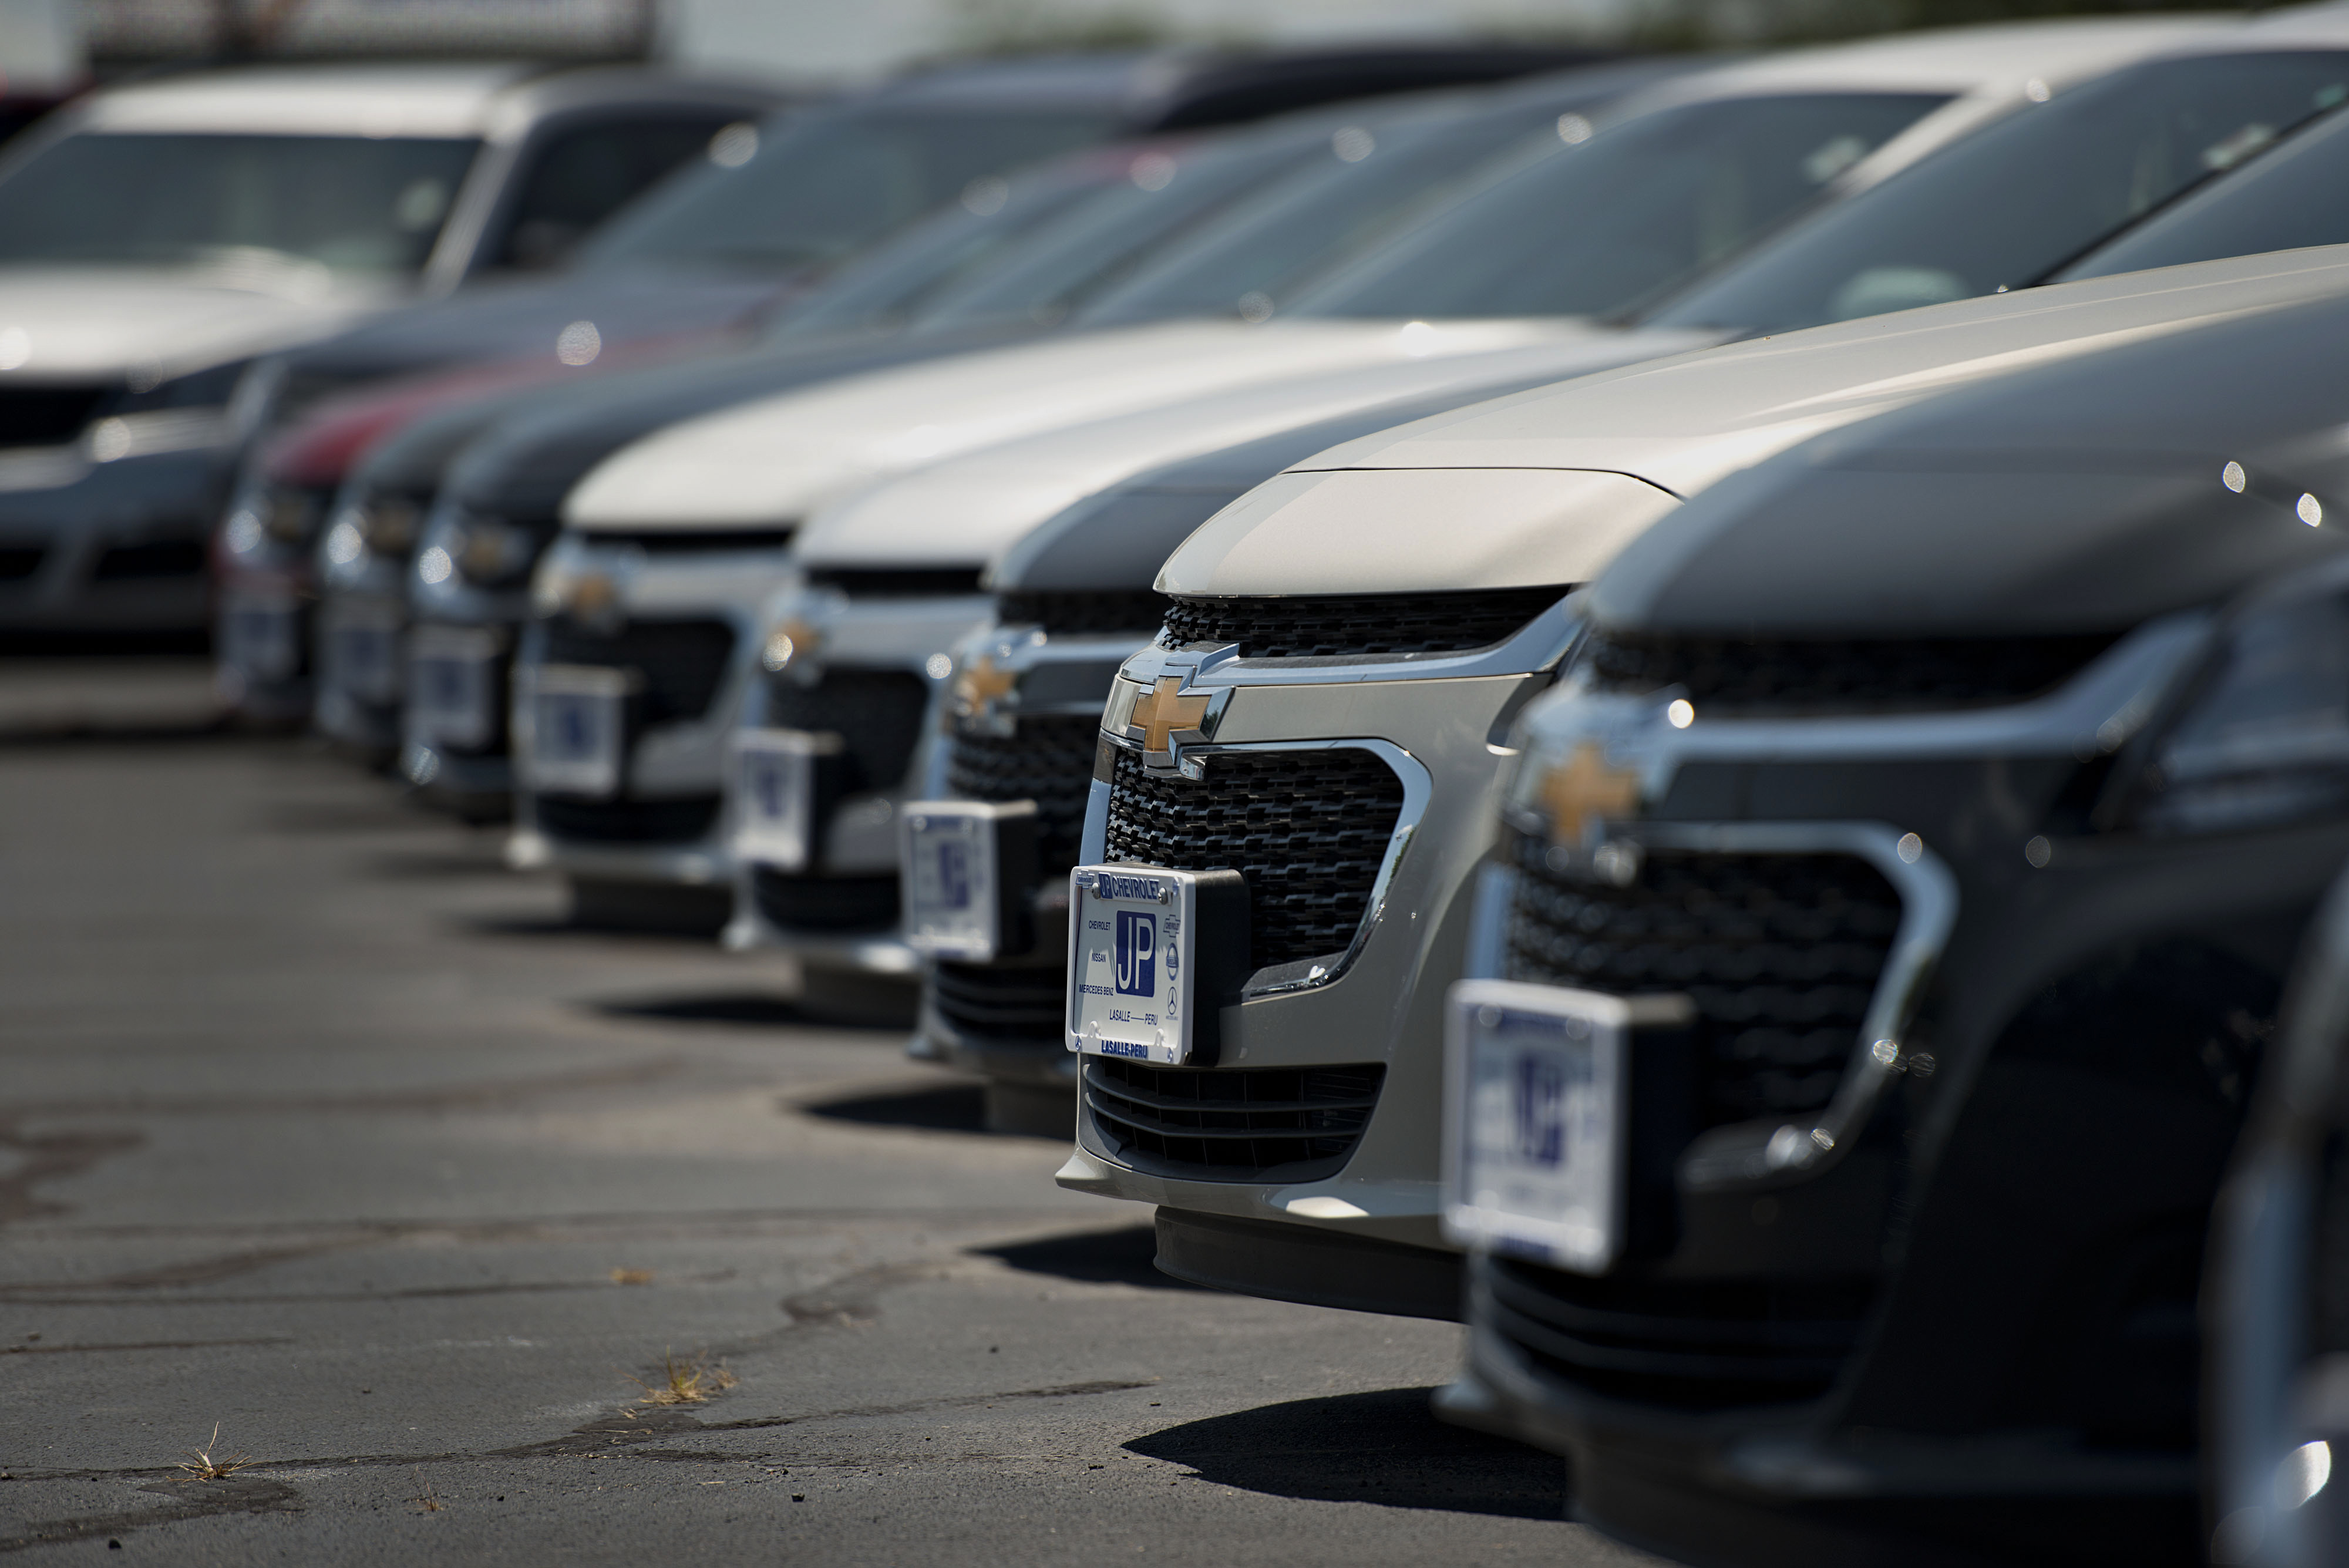 General Motors Co. Chevy Malibu vehicles sit on the lot at JP Chevrolet dealership in Peru, Illinois, U.S., on Wednesday, July 23, 2014. (Daniel Acker—Bloomberg/Getty Images)